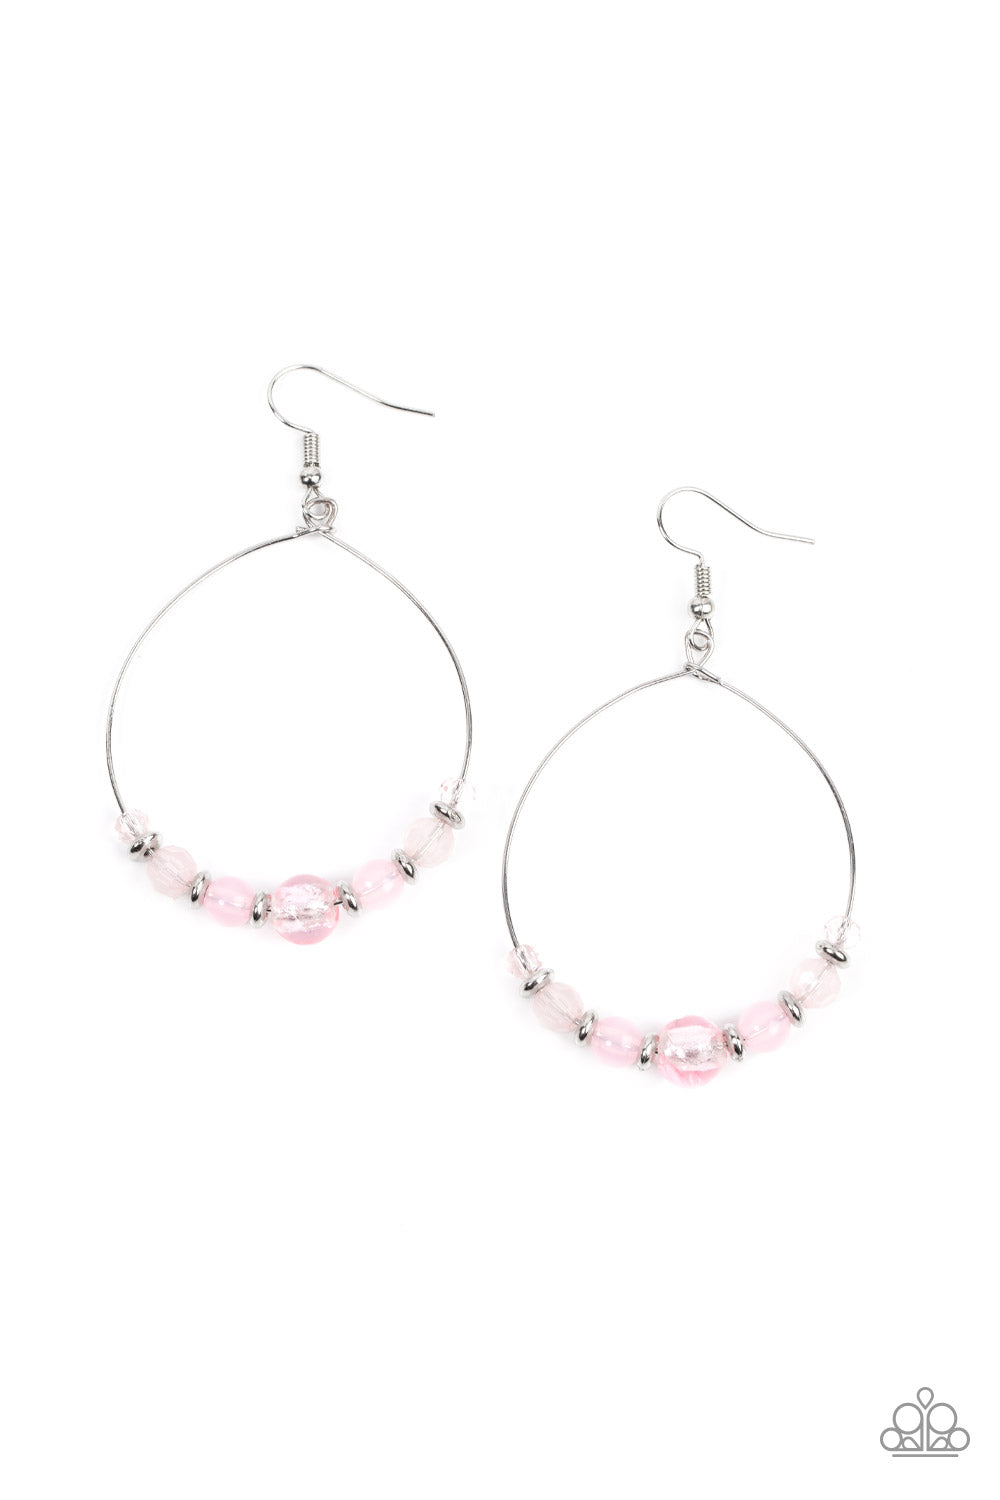 Infused with dainty silver accents, opaque and glassy pink beads glide along a wire hoop for an ethereal pop of color. Earring attaches to a standard fishhook fitting. 